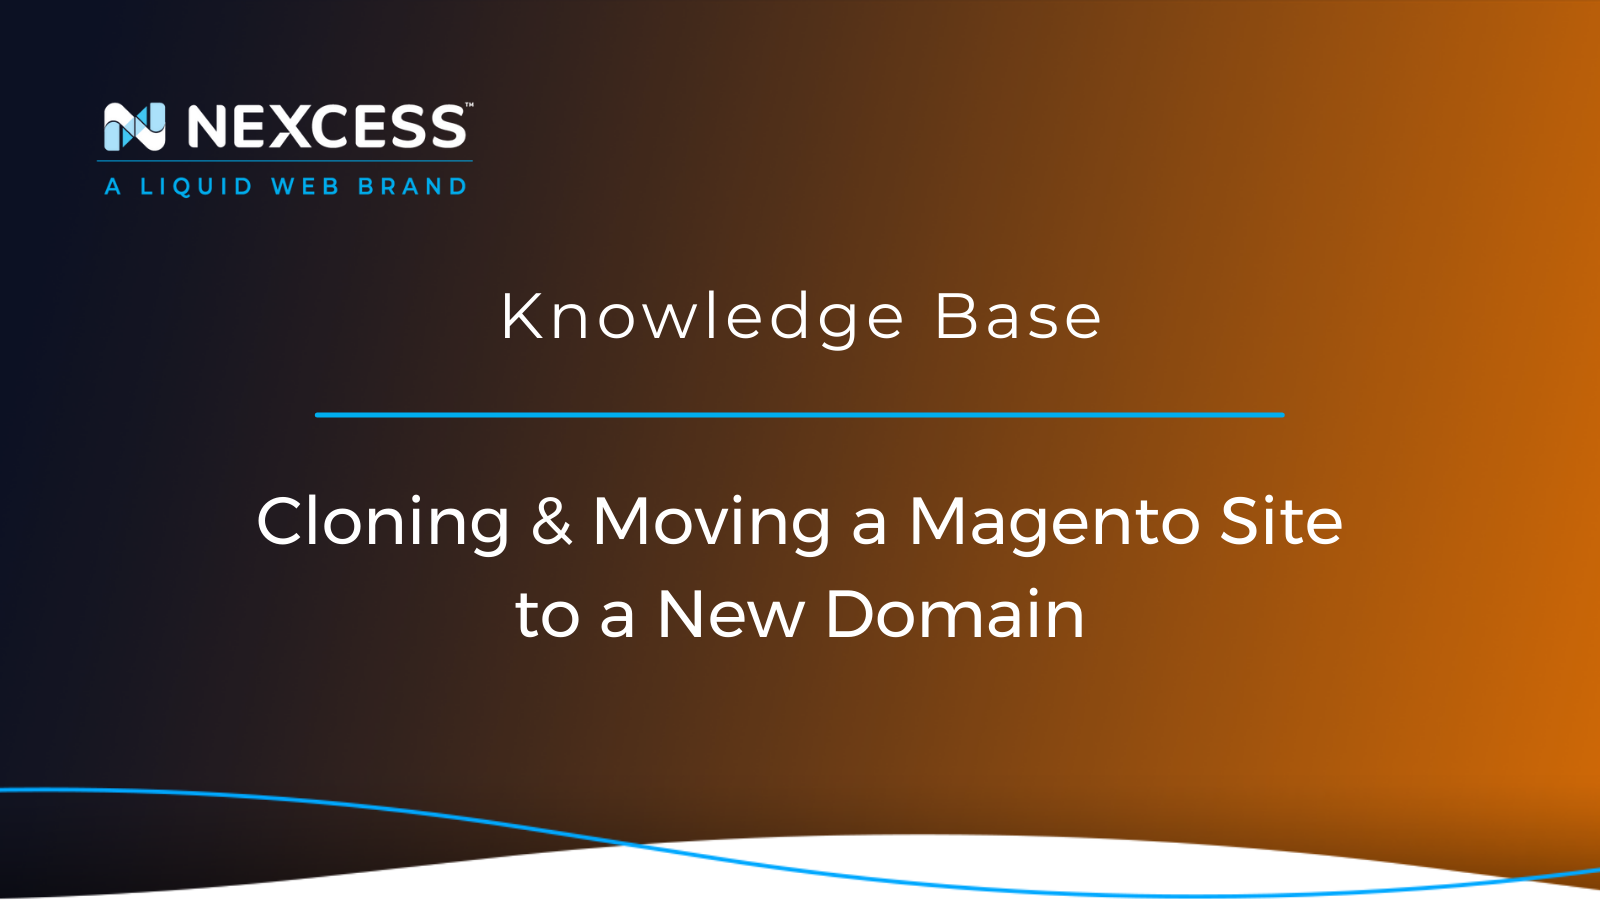 Cloning & Moving a Magento Site to a New Domain